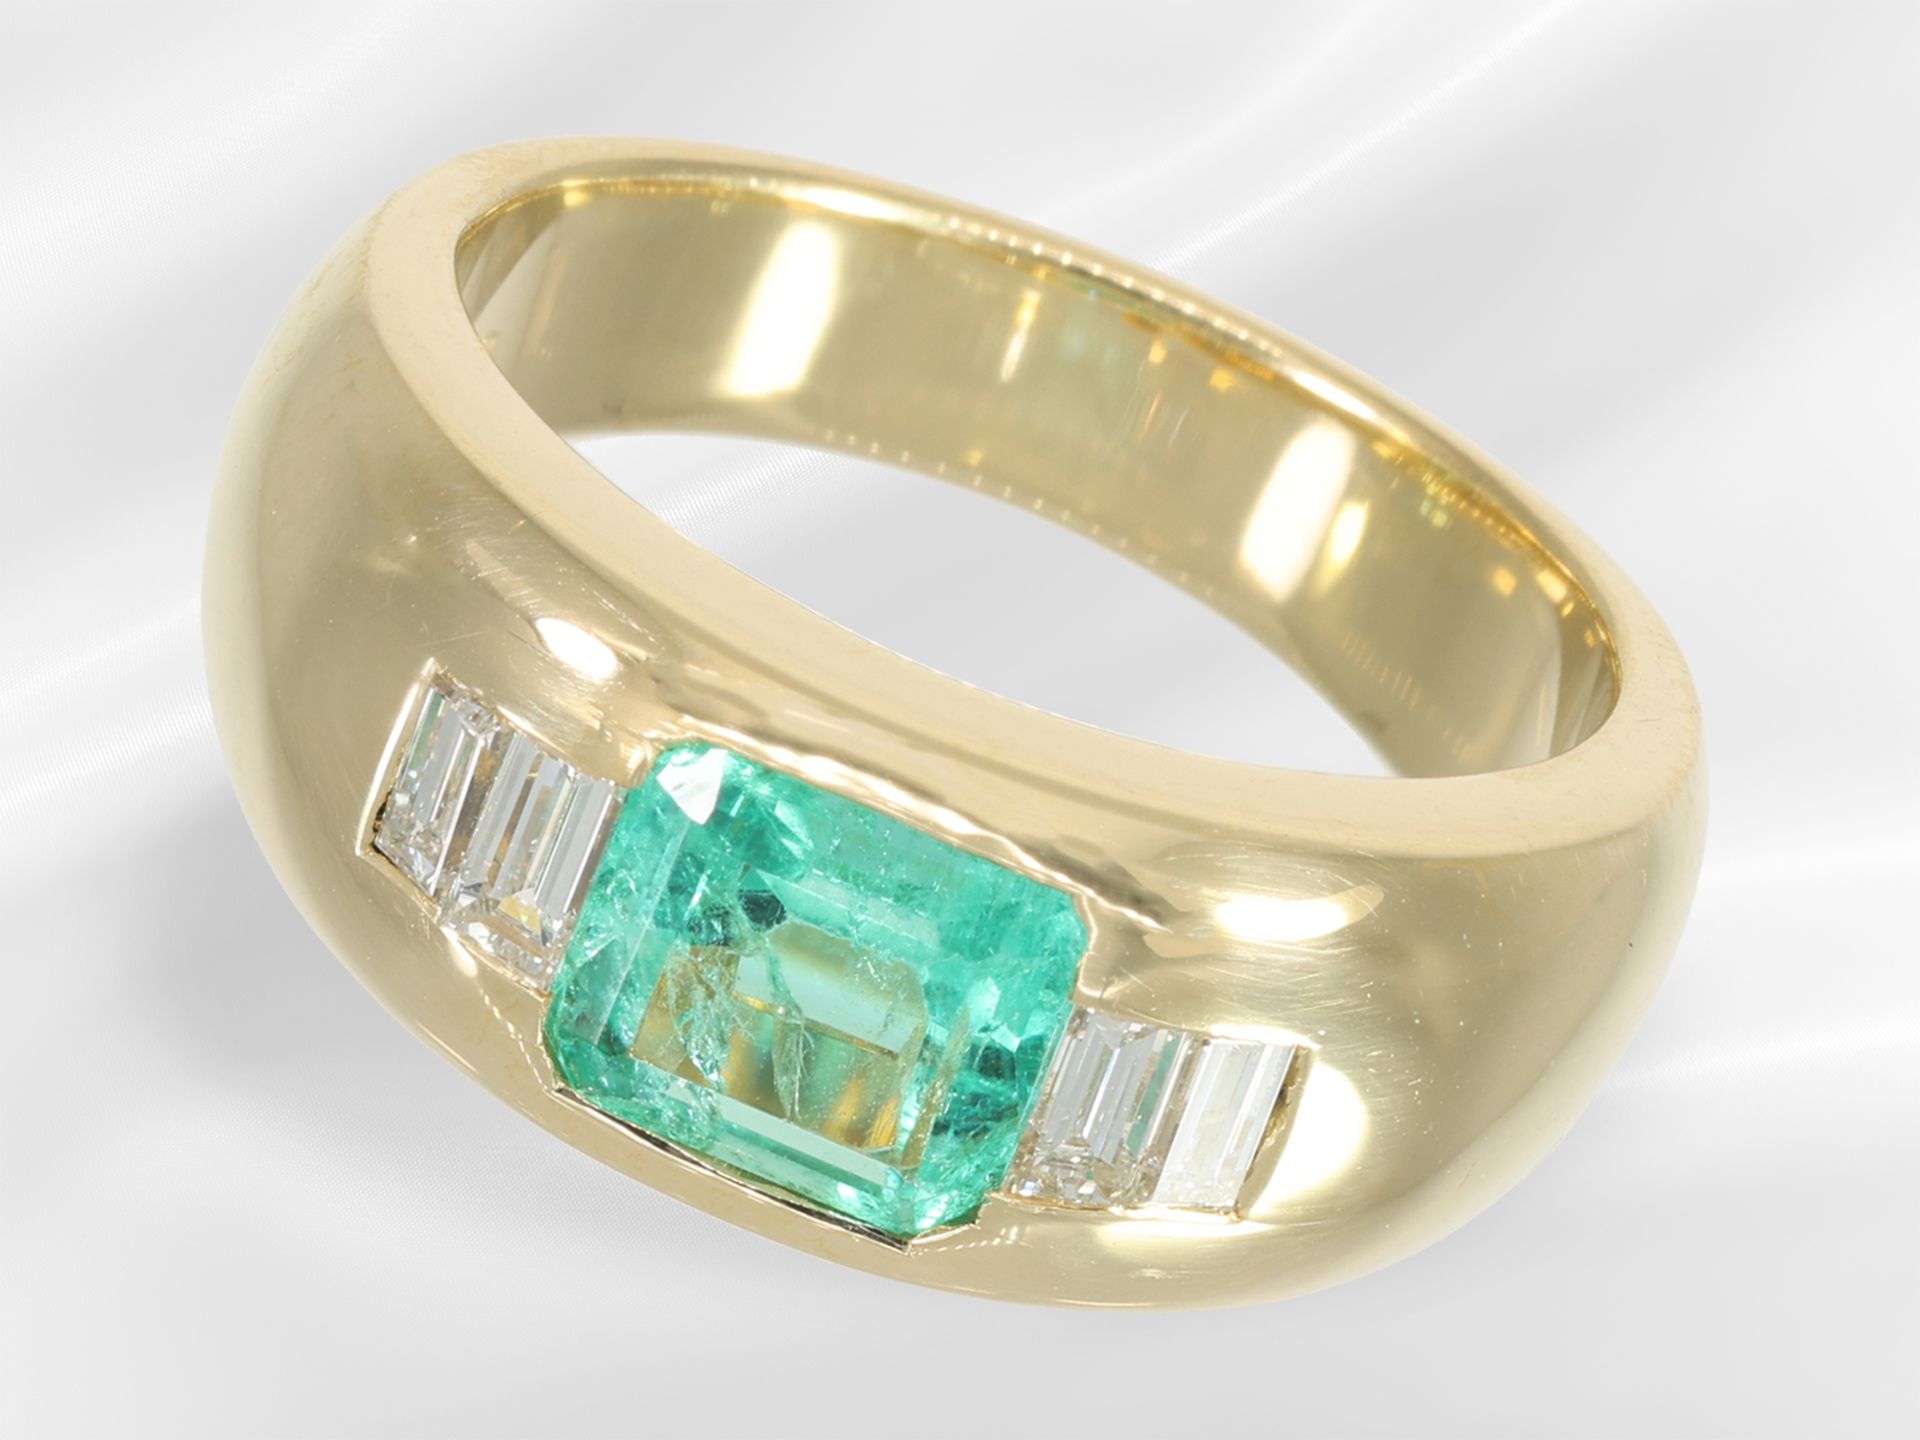 Ring: high-quality, solid band ring with fine gemstone setting, shining emerald approx. 1.2ct